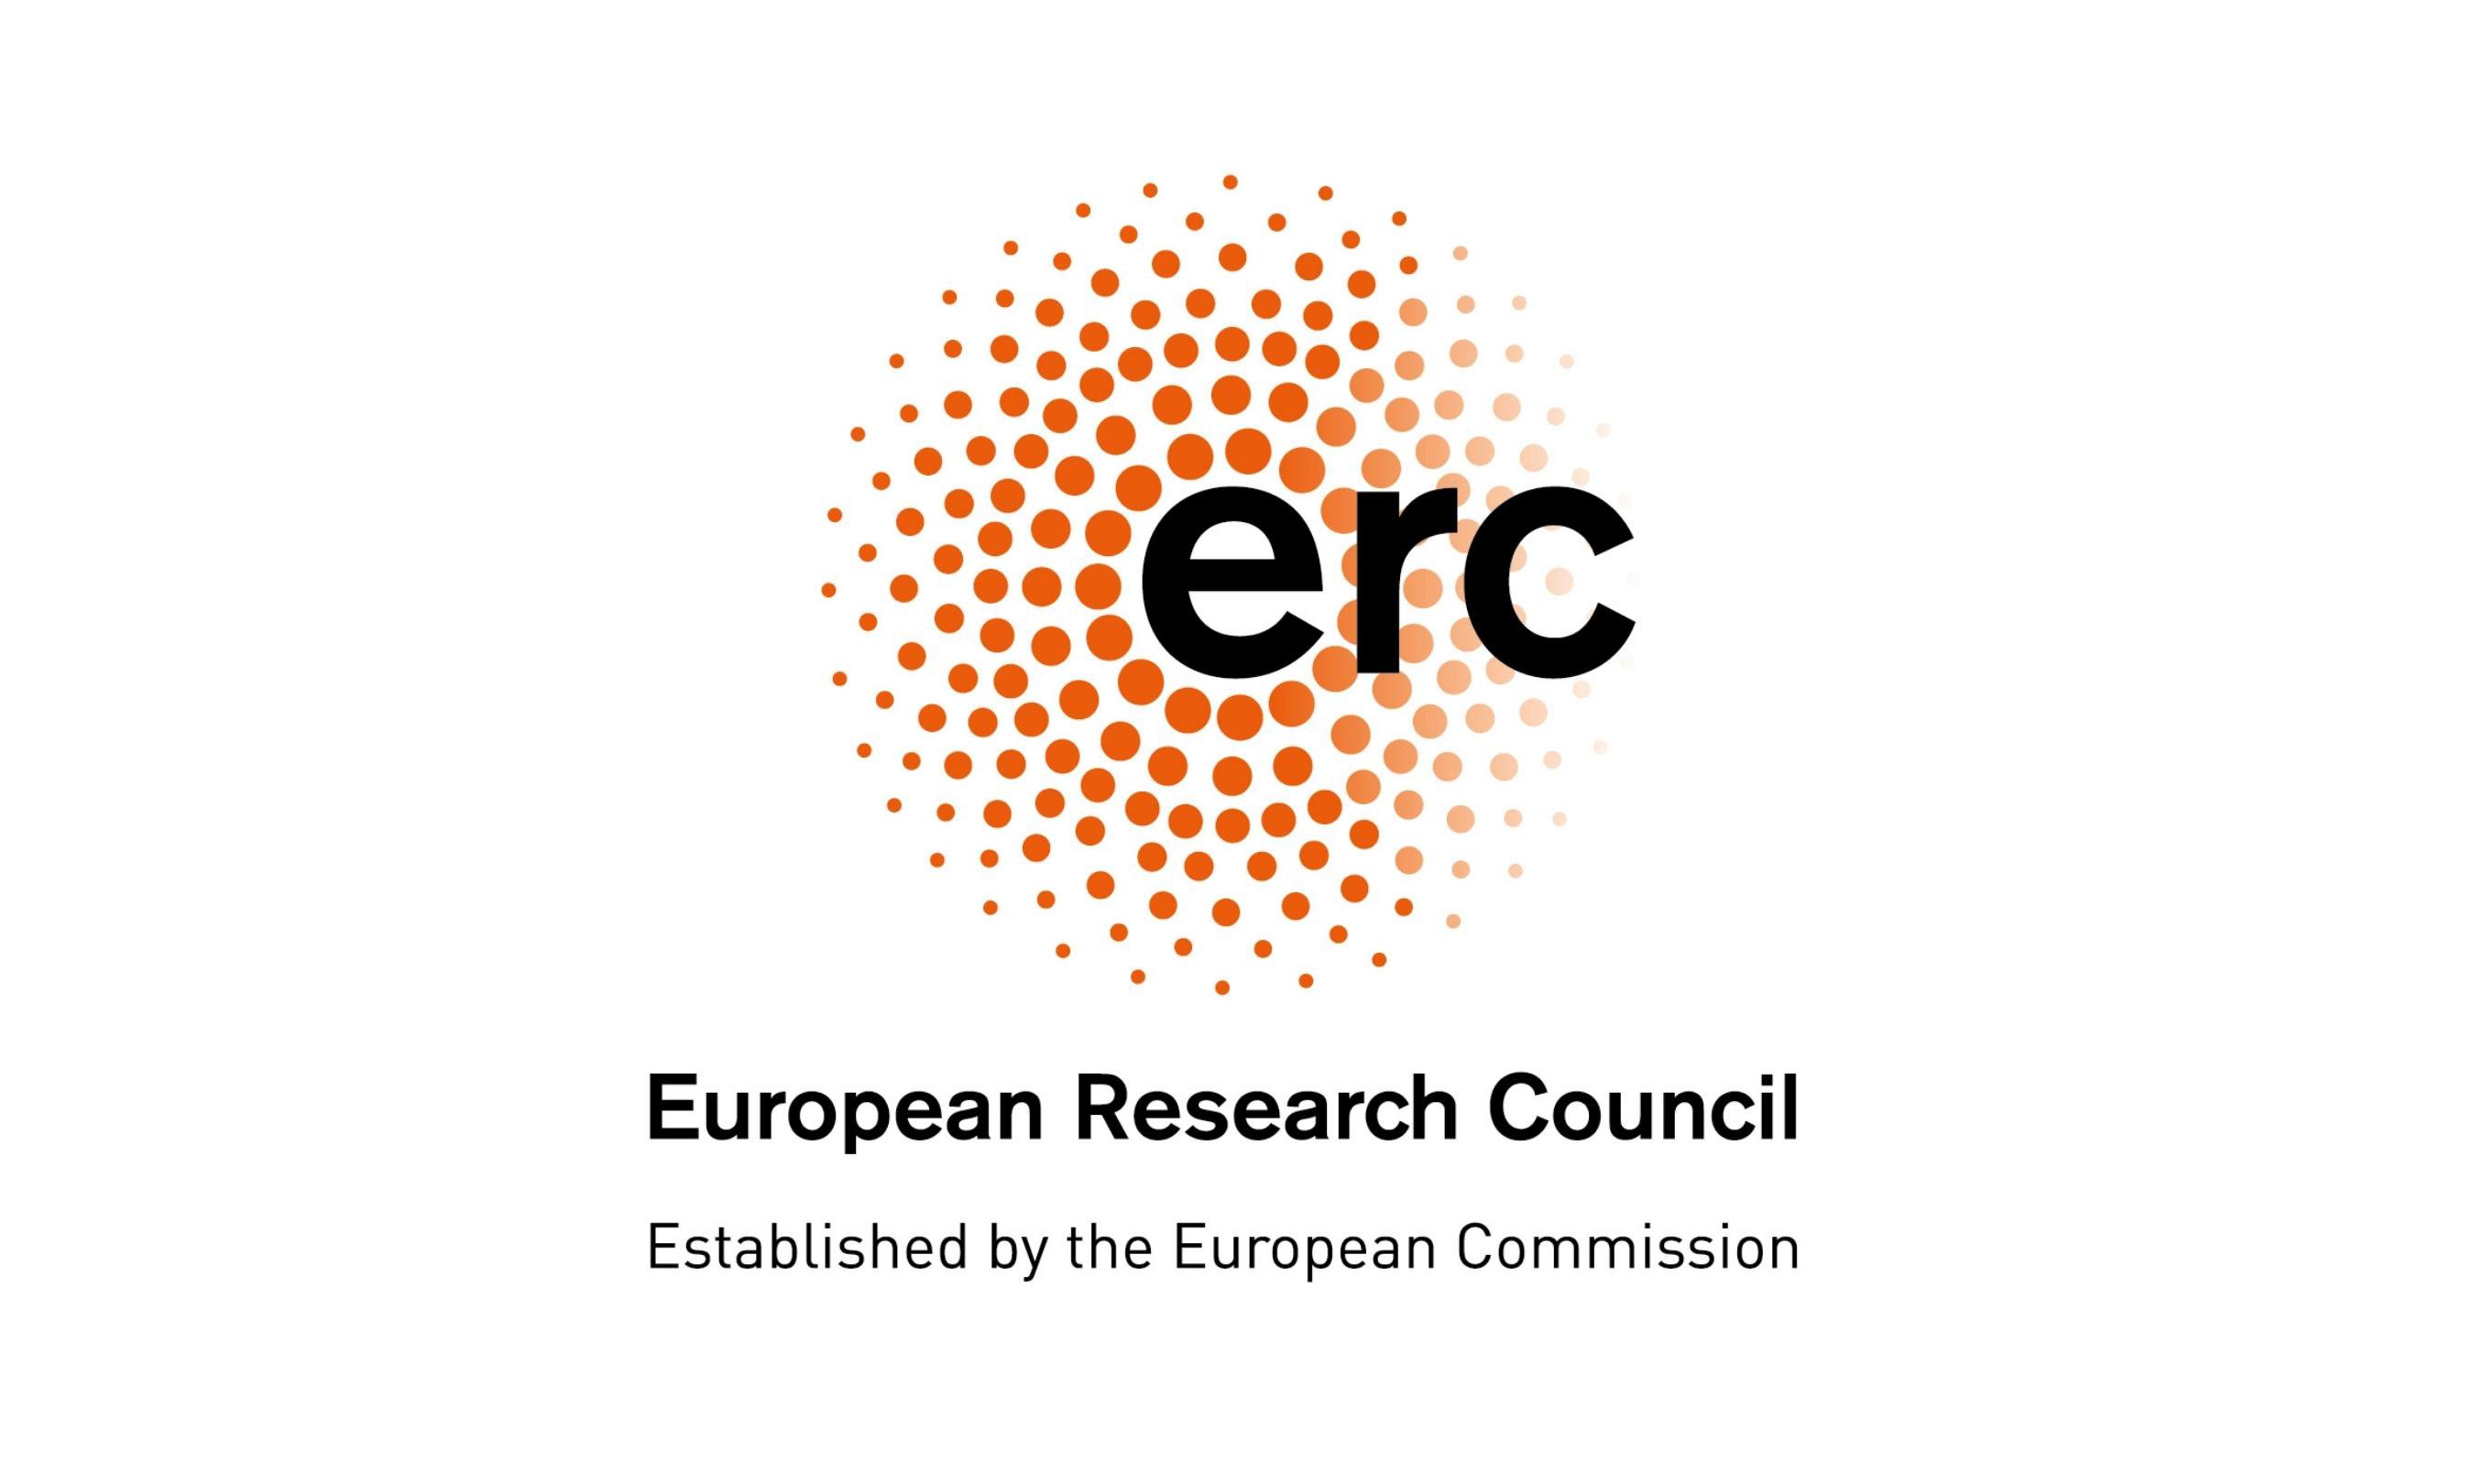 We are happy to share that our lab has been awarded a European Research Council (ERC) Proof of Concept grant for our project, Golden-ADC, a novel nanotechnology approach for antibody-drug conjugates.